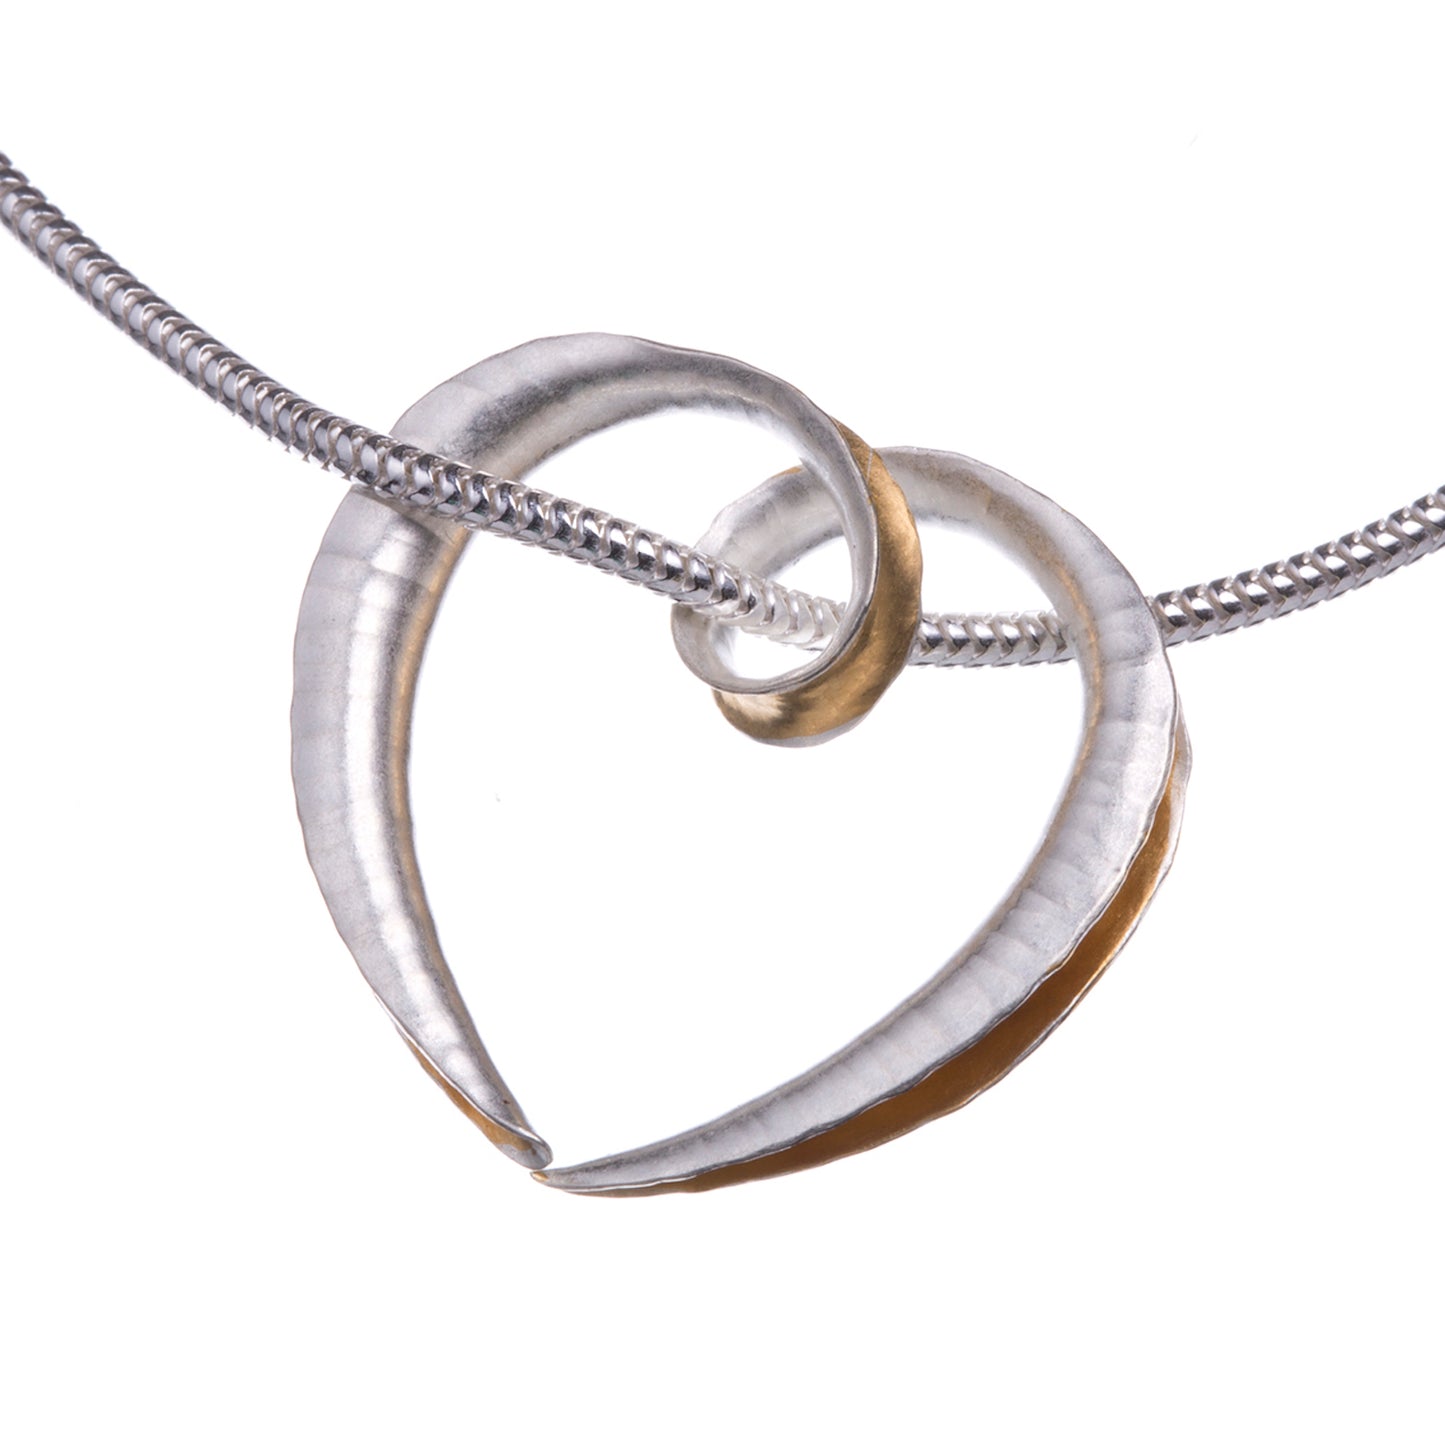 A small silver heart pendant made from a single piece of metal, formed into a sort of tube with the outer side open and gold plated on the inside surface for contrast. It is formed into a loop at the top which the chain passes through.